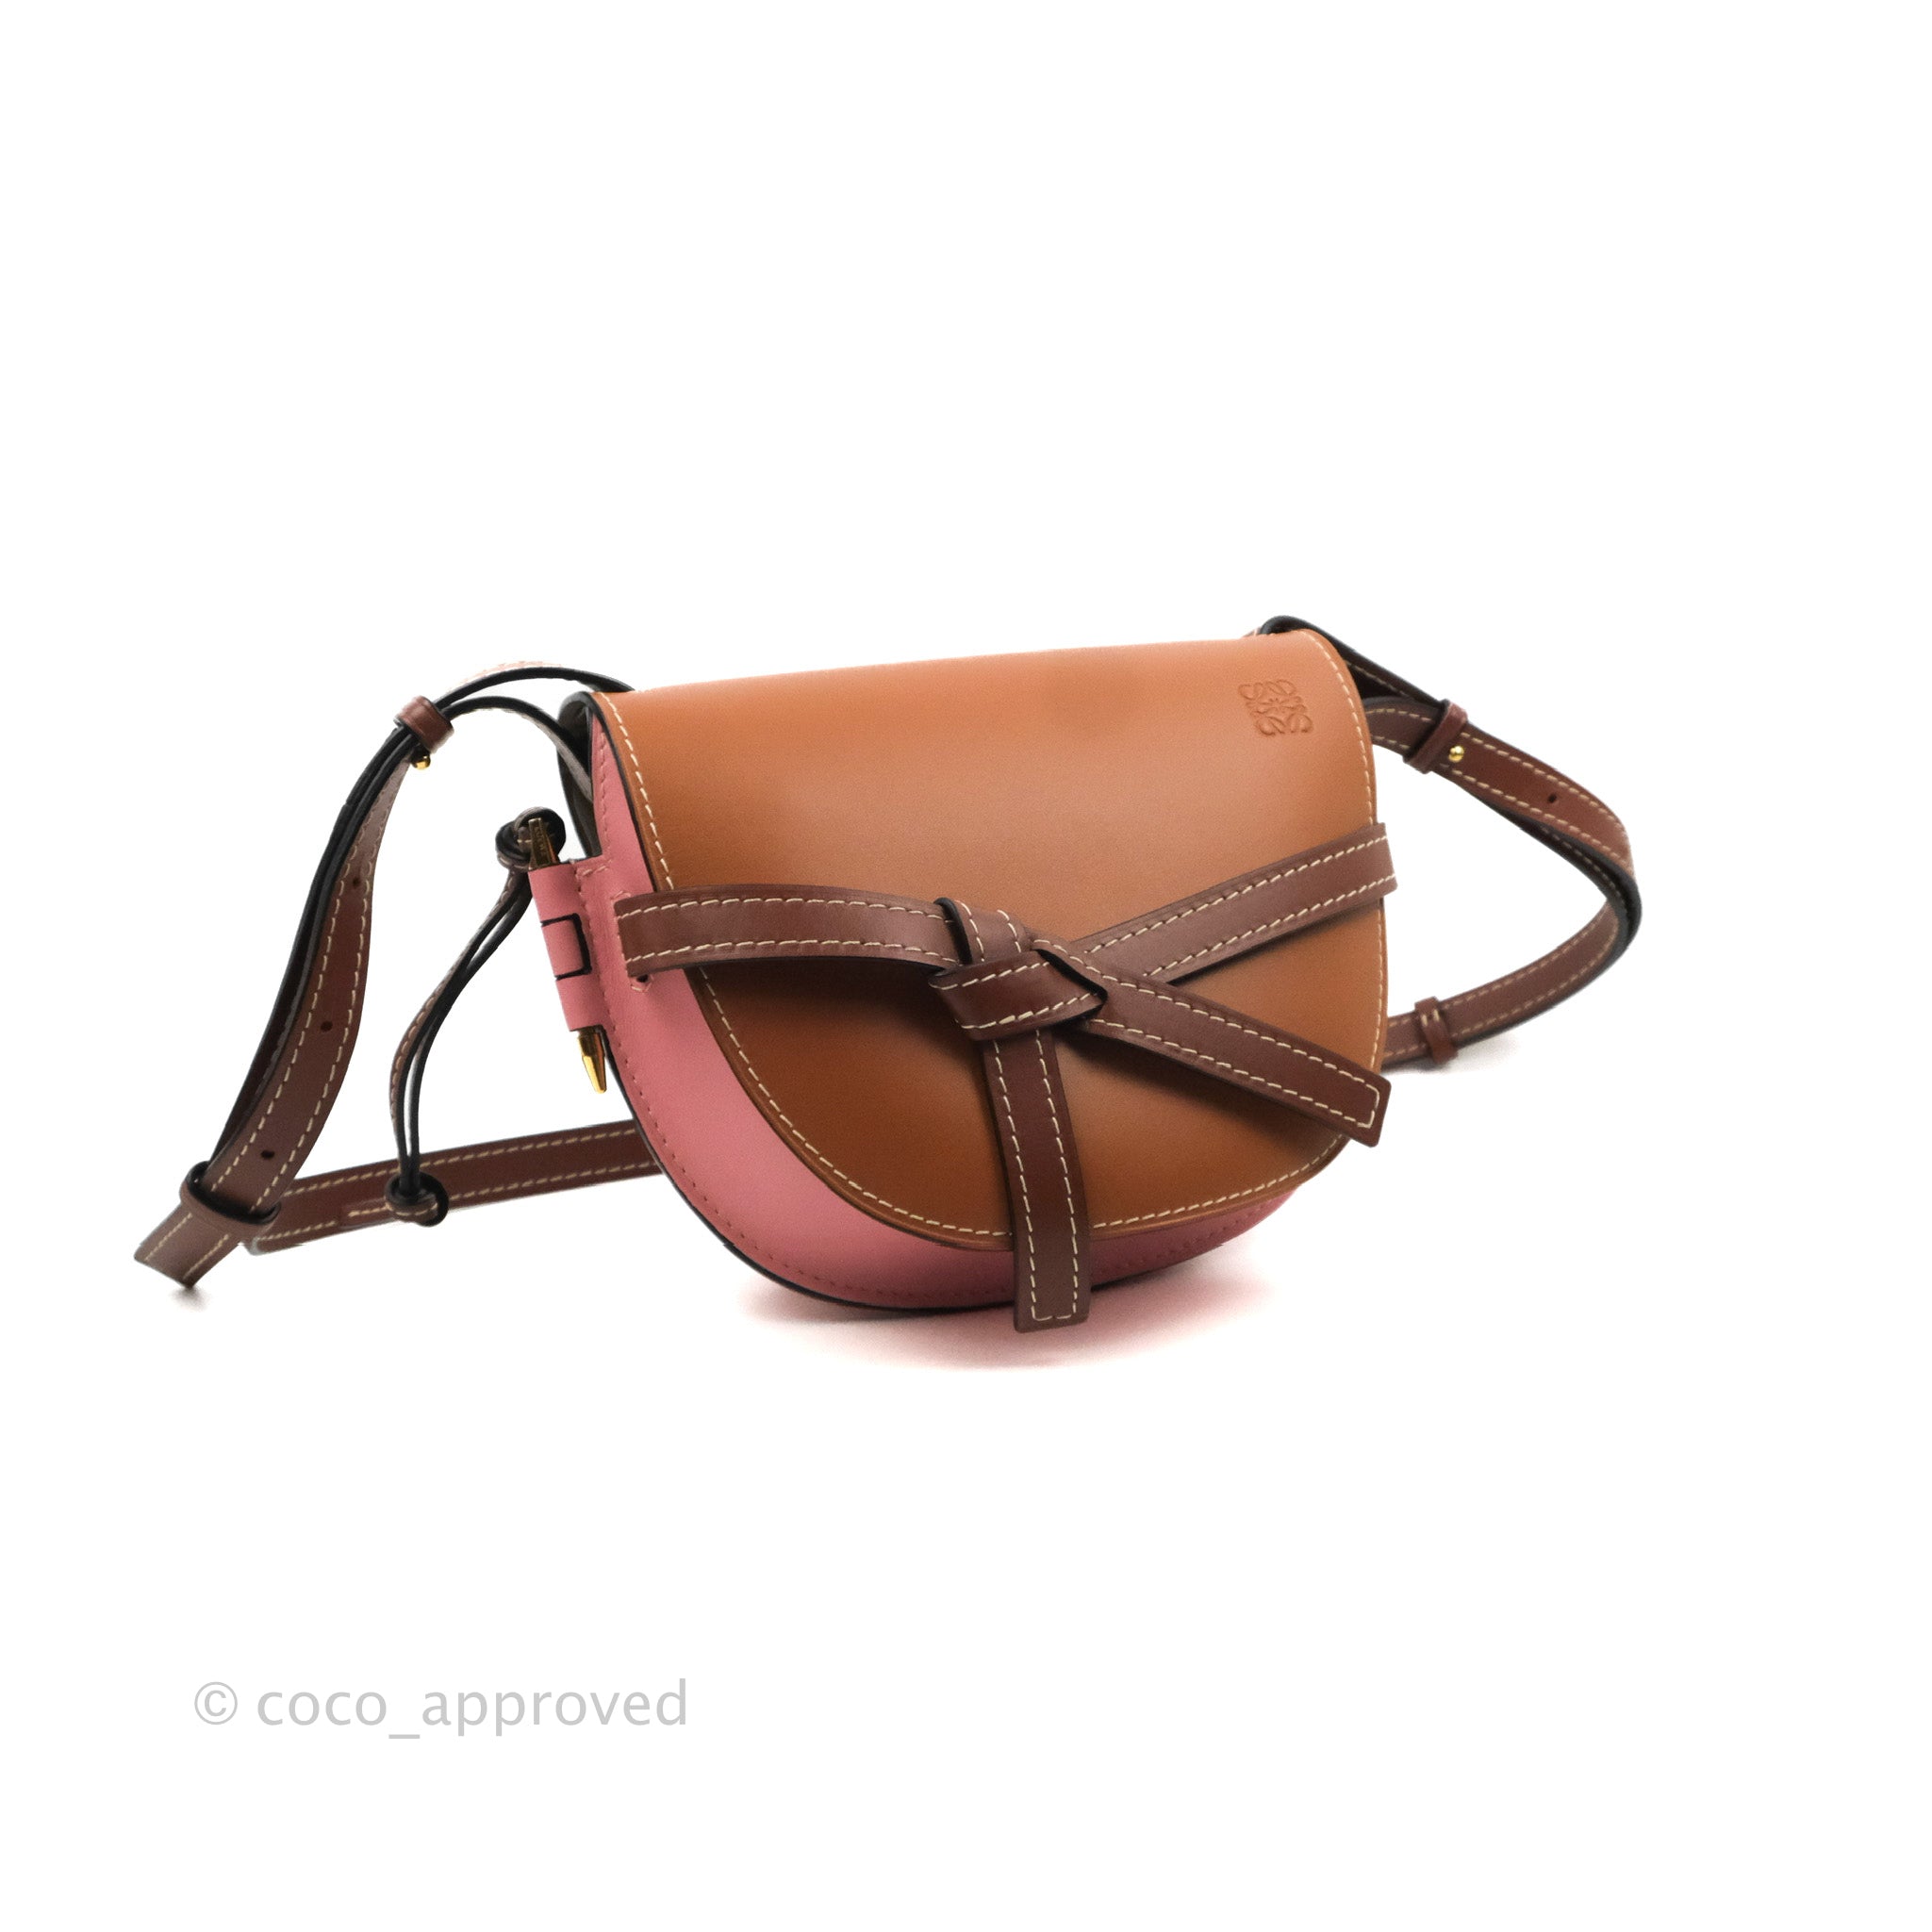 Loewe Small Gate Bag Smooth Calfskin in Tan/Pink – Coco Approved Studio